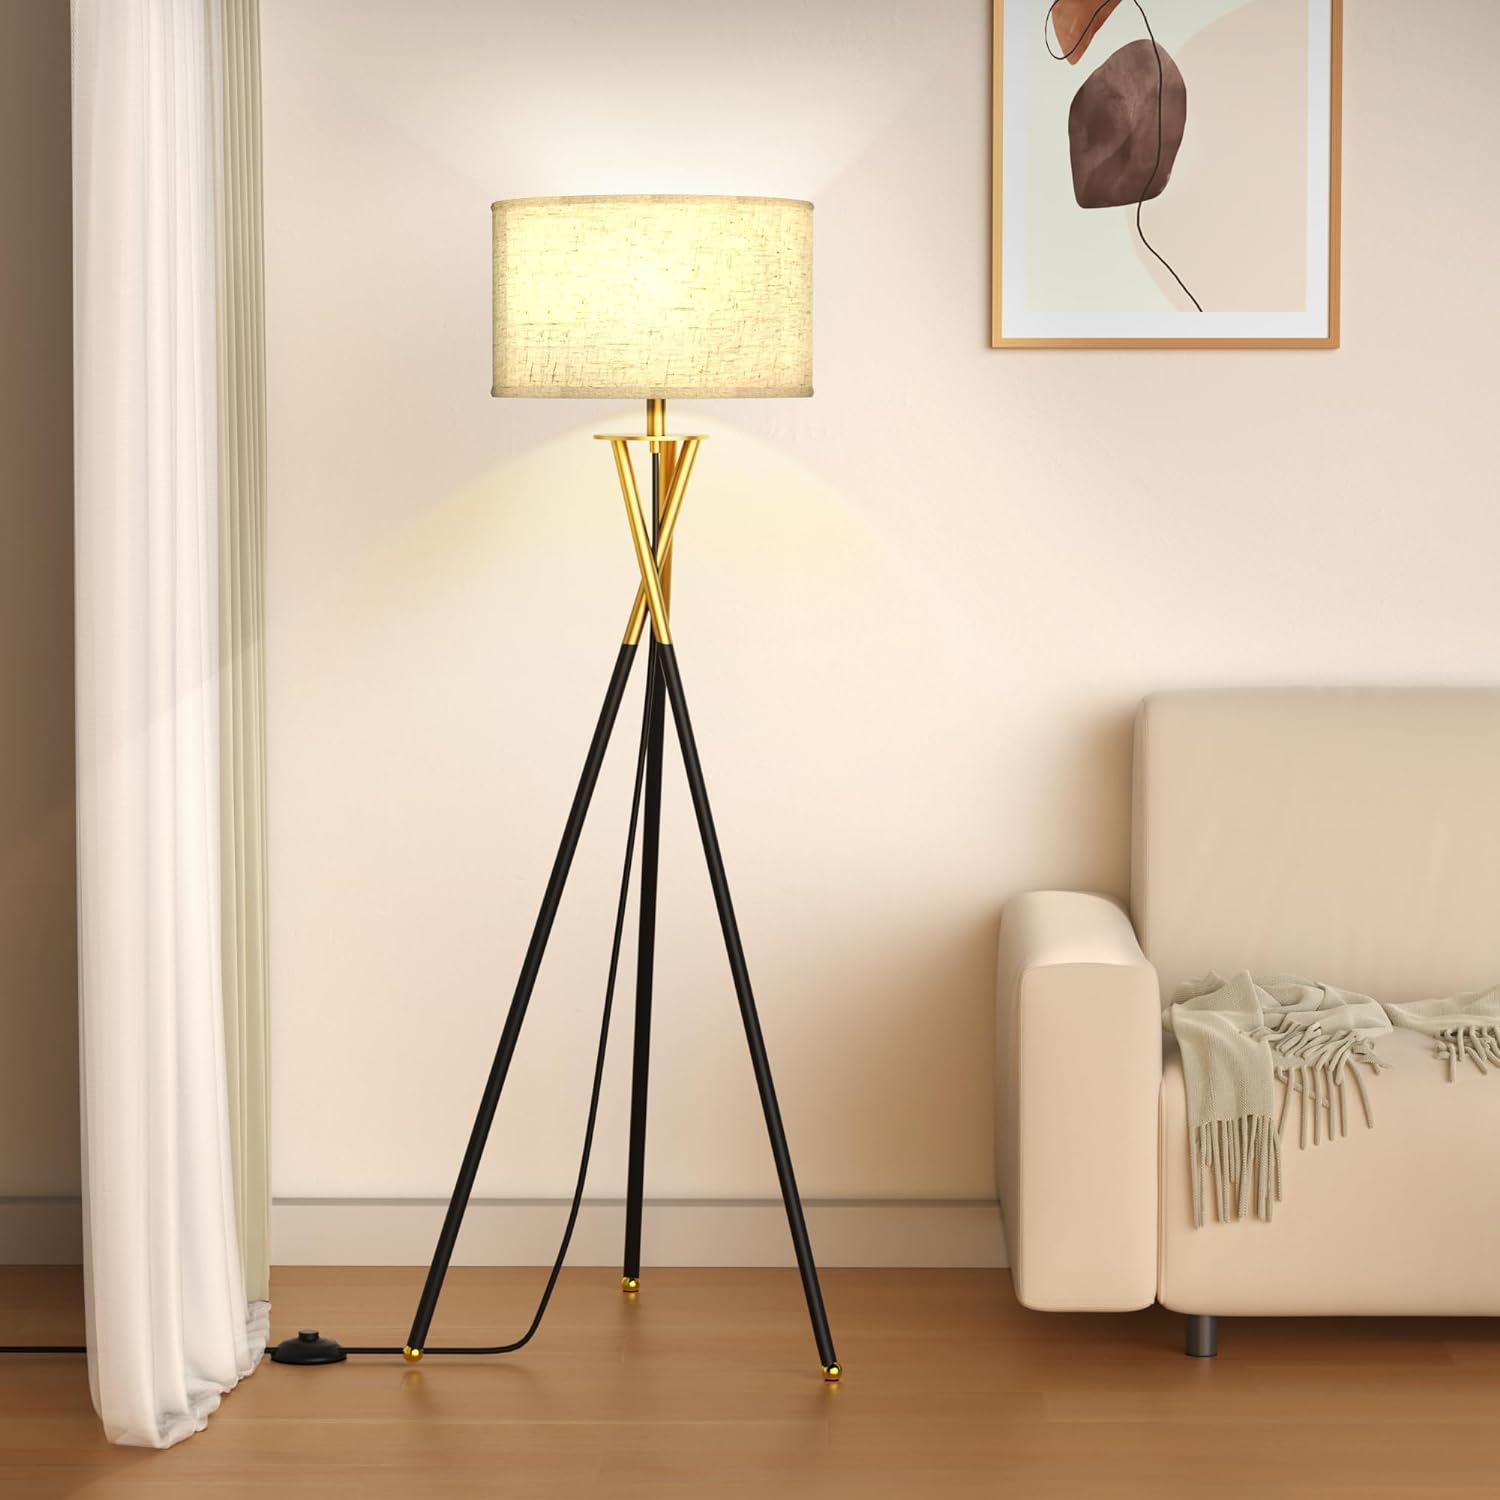 Capon Tripod Floor Lamp for Living Room, Tall Standing Lamp White with E26 Bulbs, Beige/Black Linen Shade and 3 Color Temperatures, Ideal for Bedroom, Office, Classroom, Dorm Room and Study Room